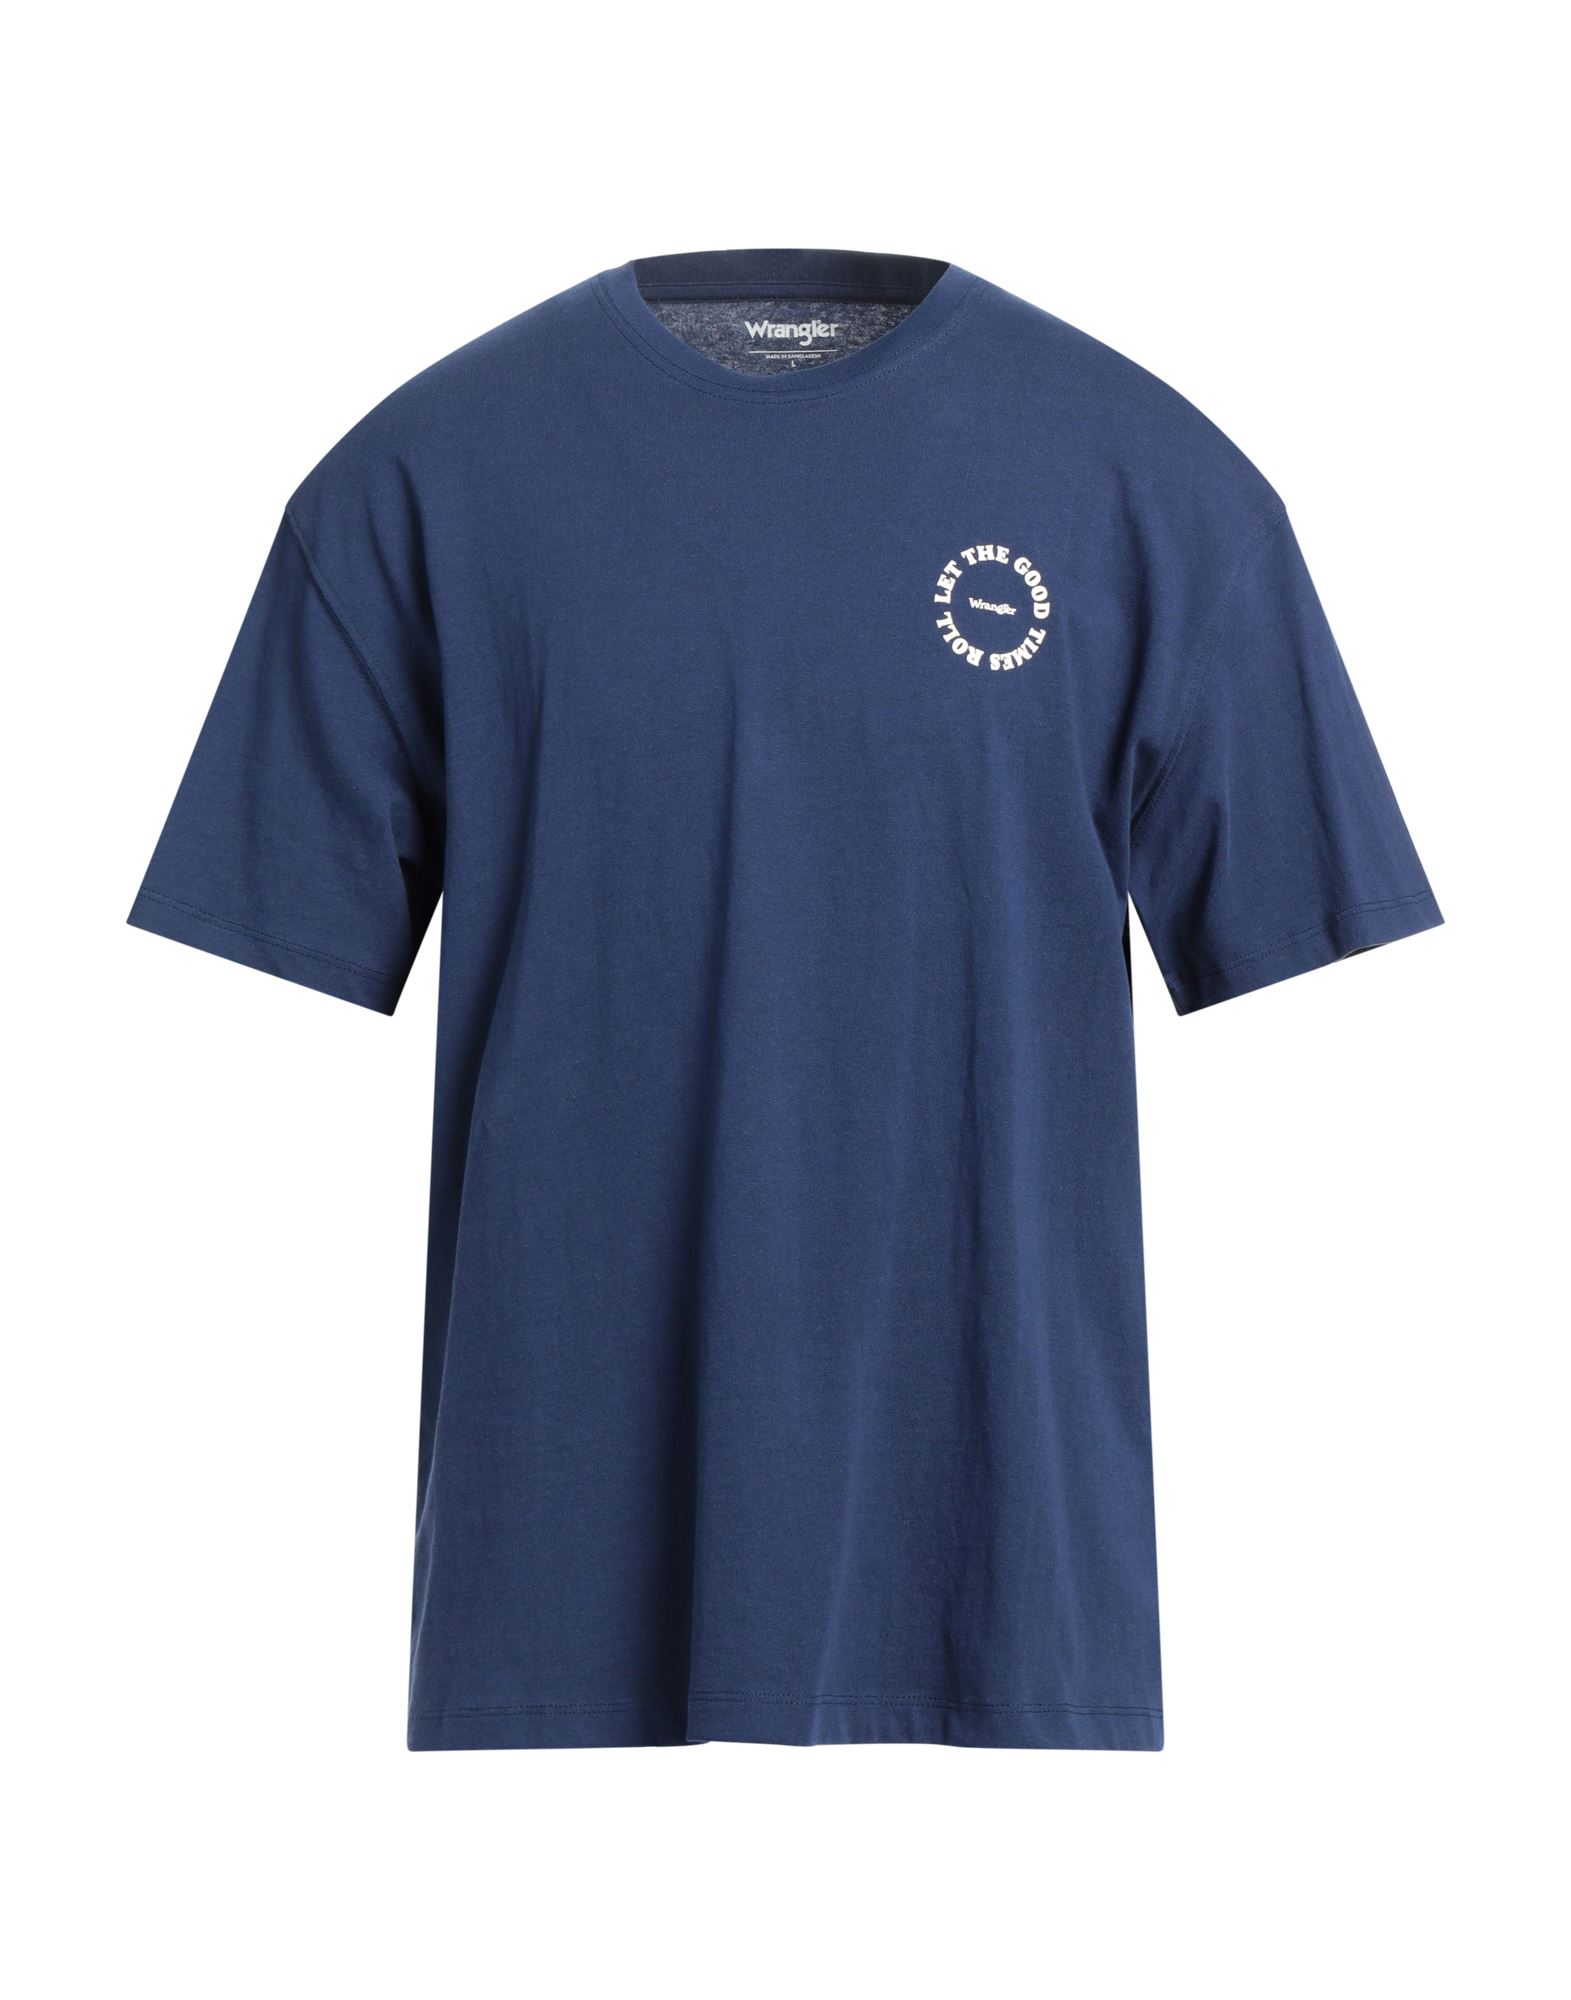 Wrangler T-shirts In Blue